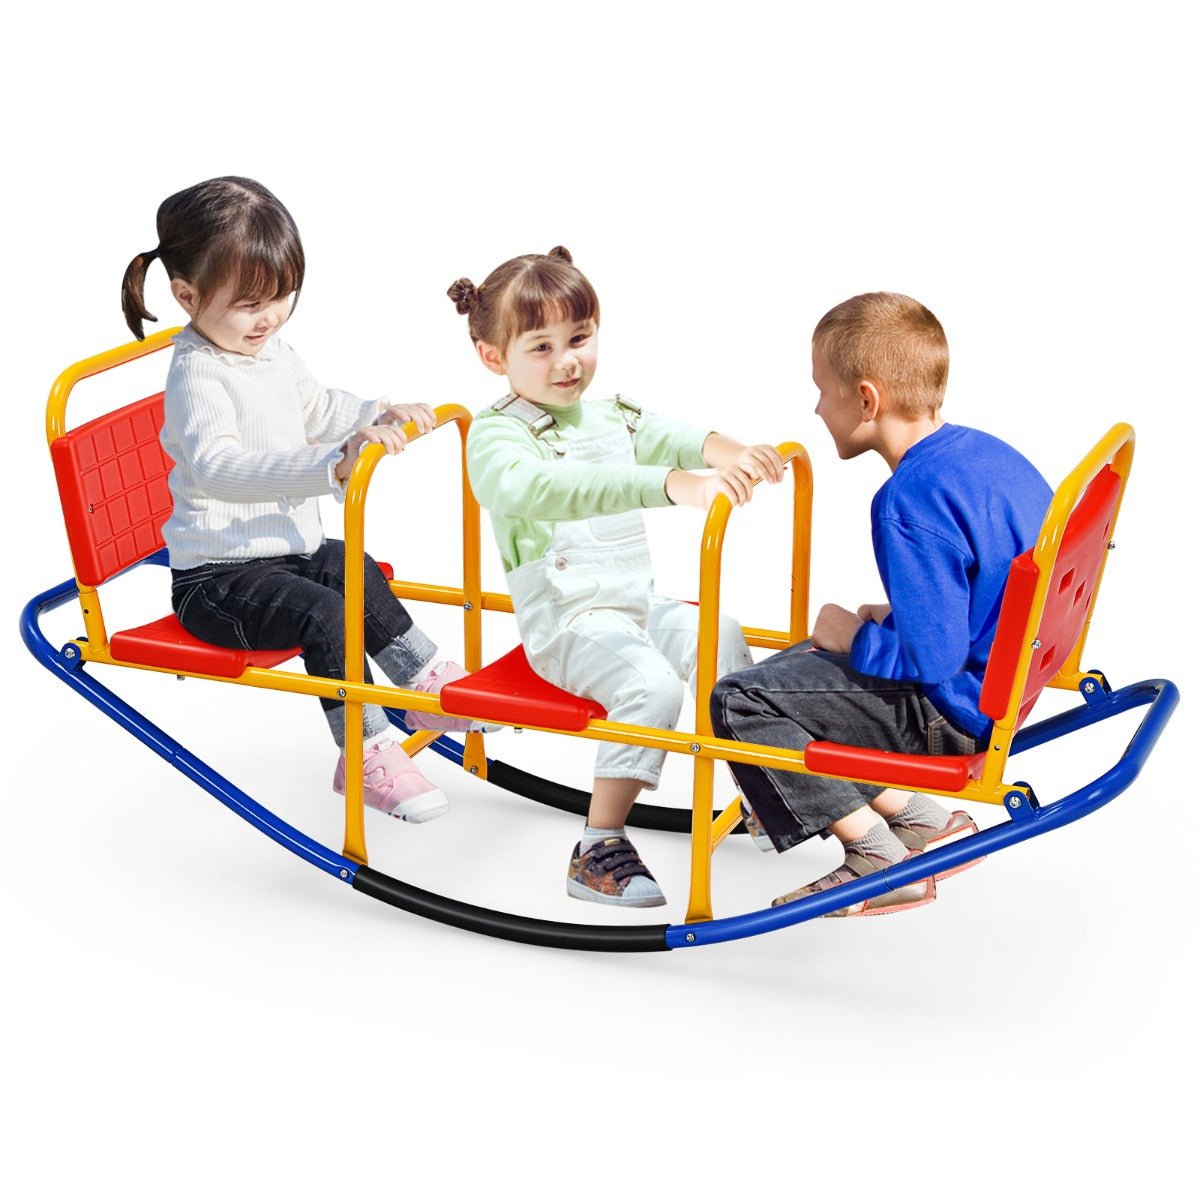 Kids Seesaw with Handlebars: Metal Rocking Fun for Active Play